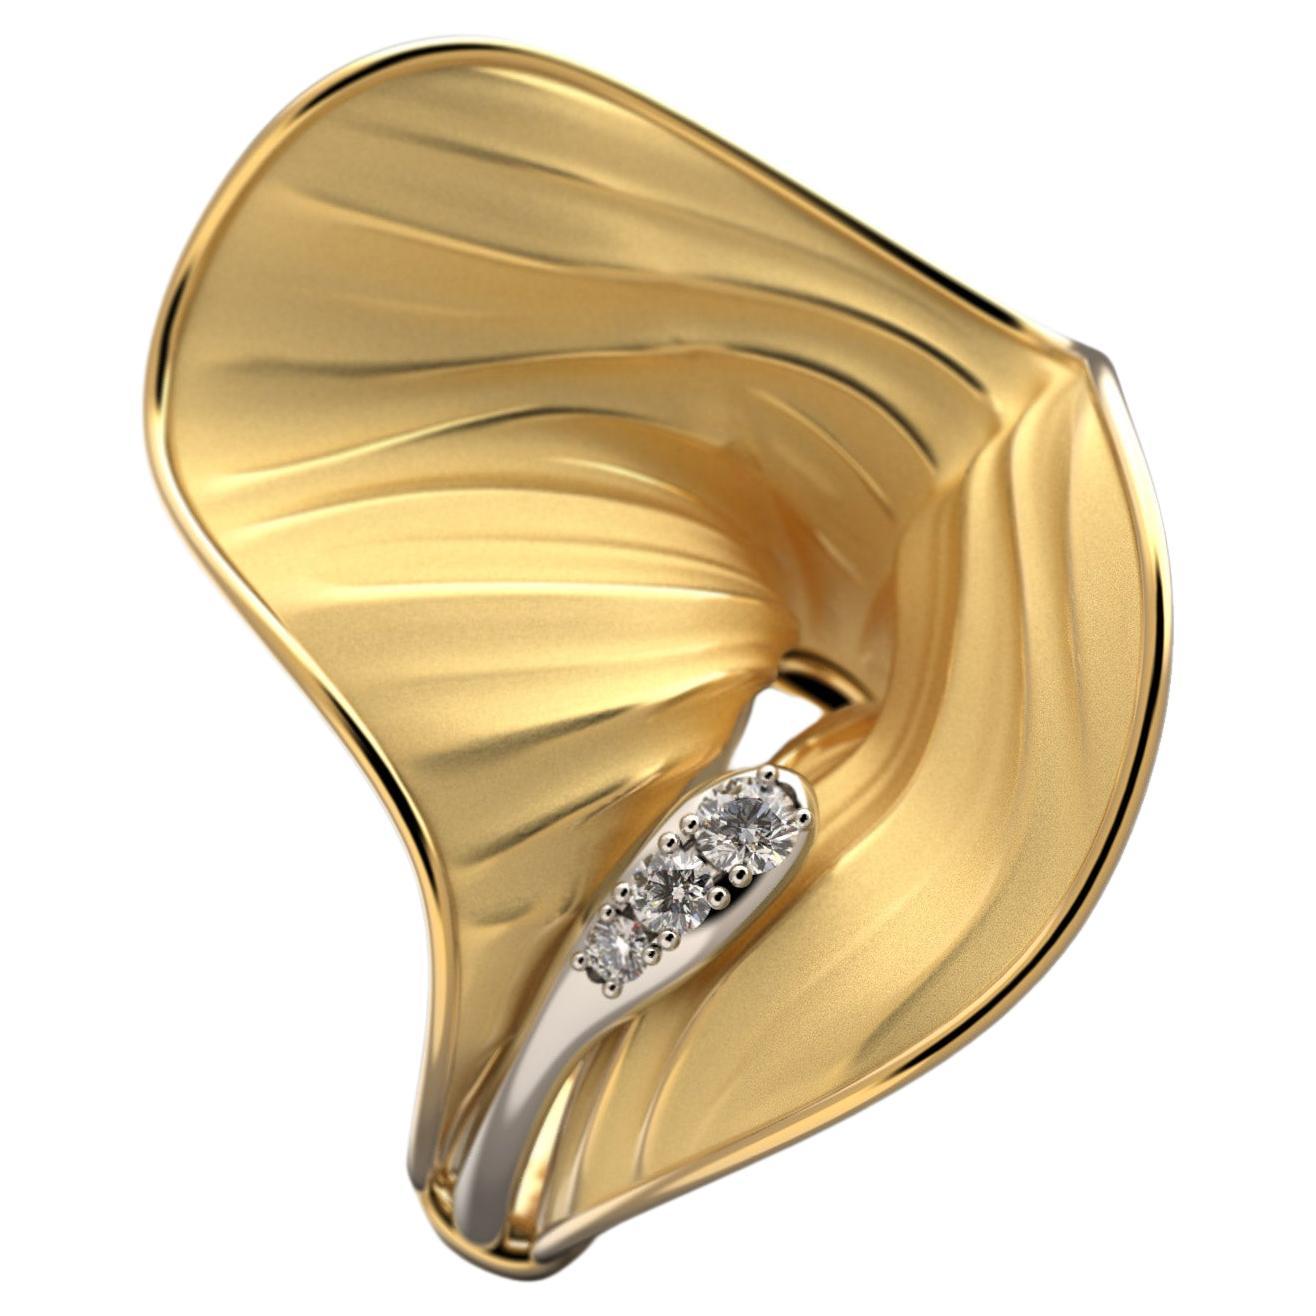 For Sale:  Oltremare Gioielli 18k Gold Ring with Diamonds, Made in Italy Diamond Ring 7